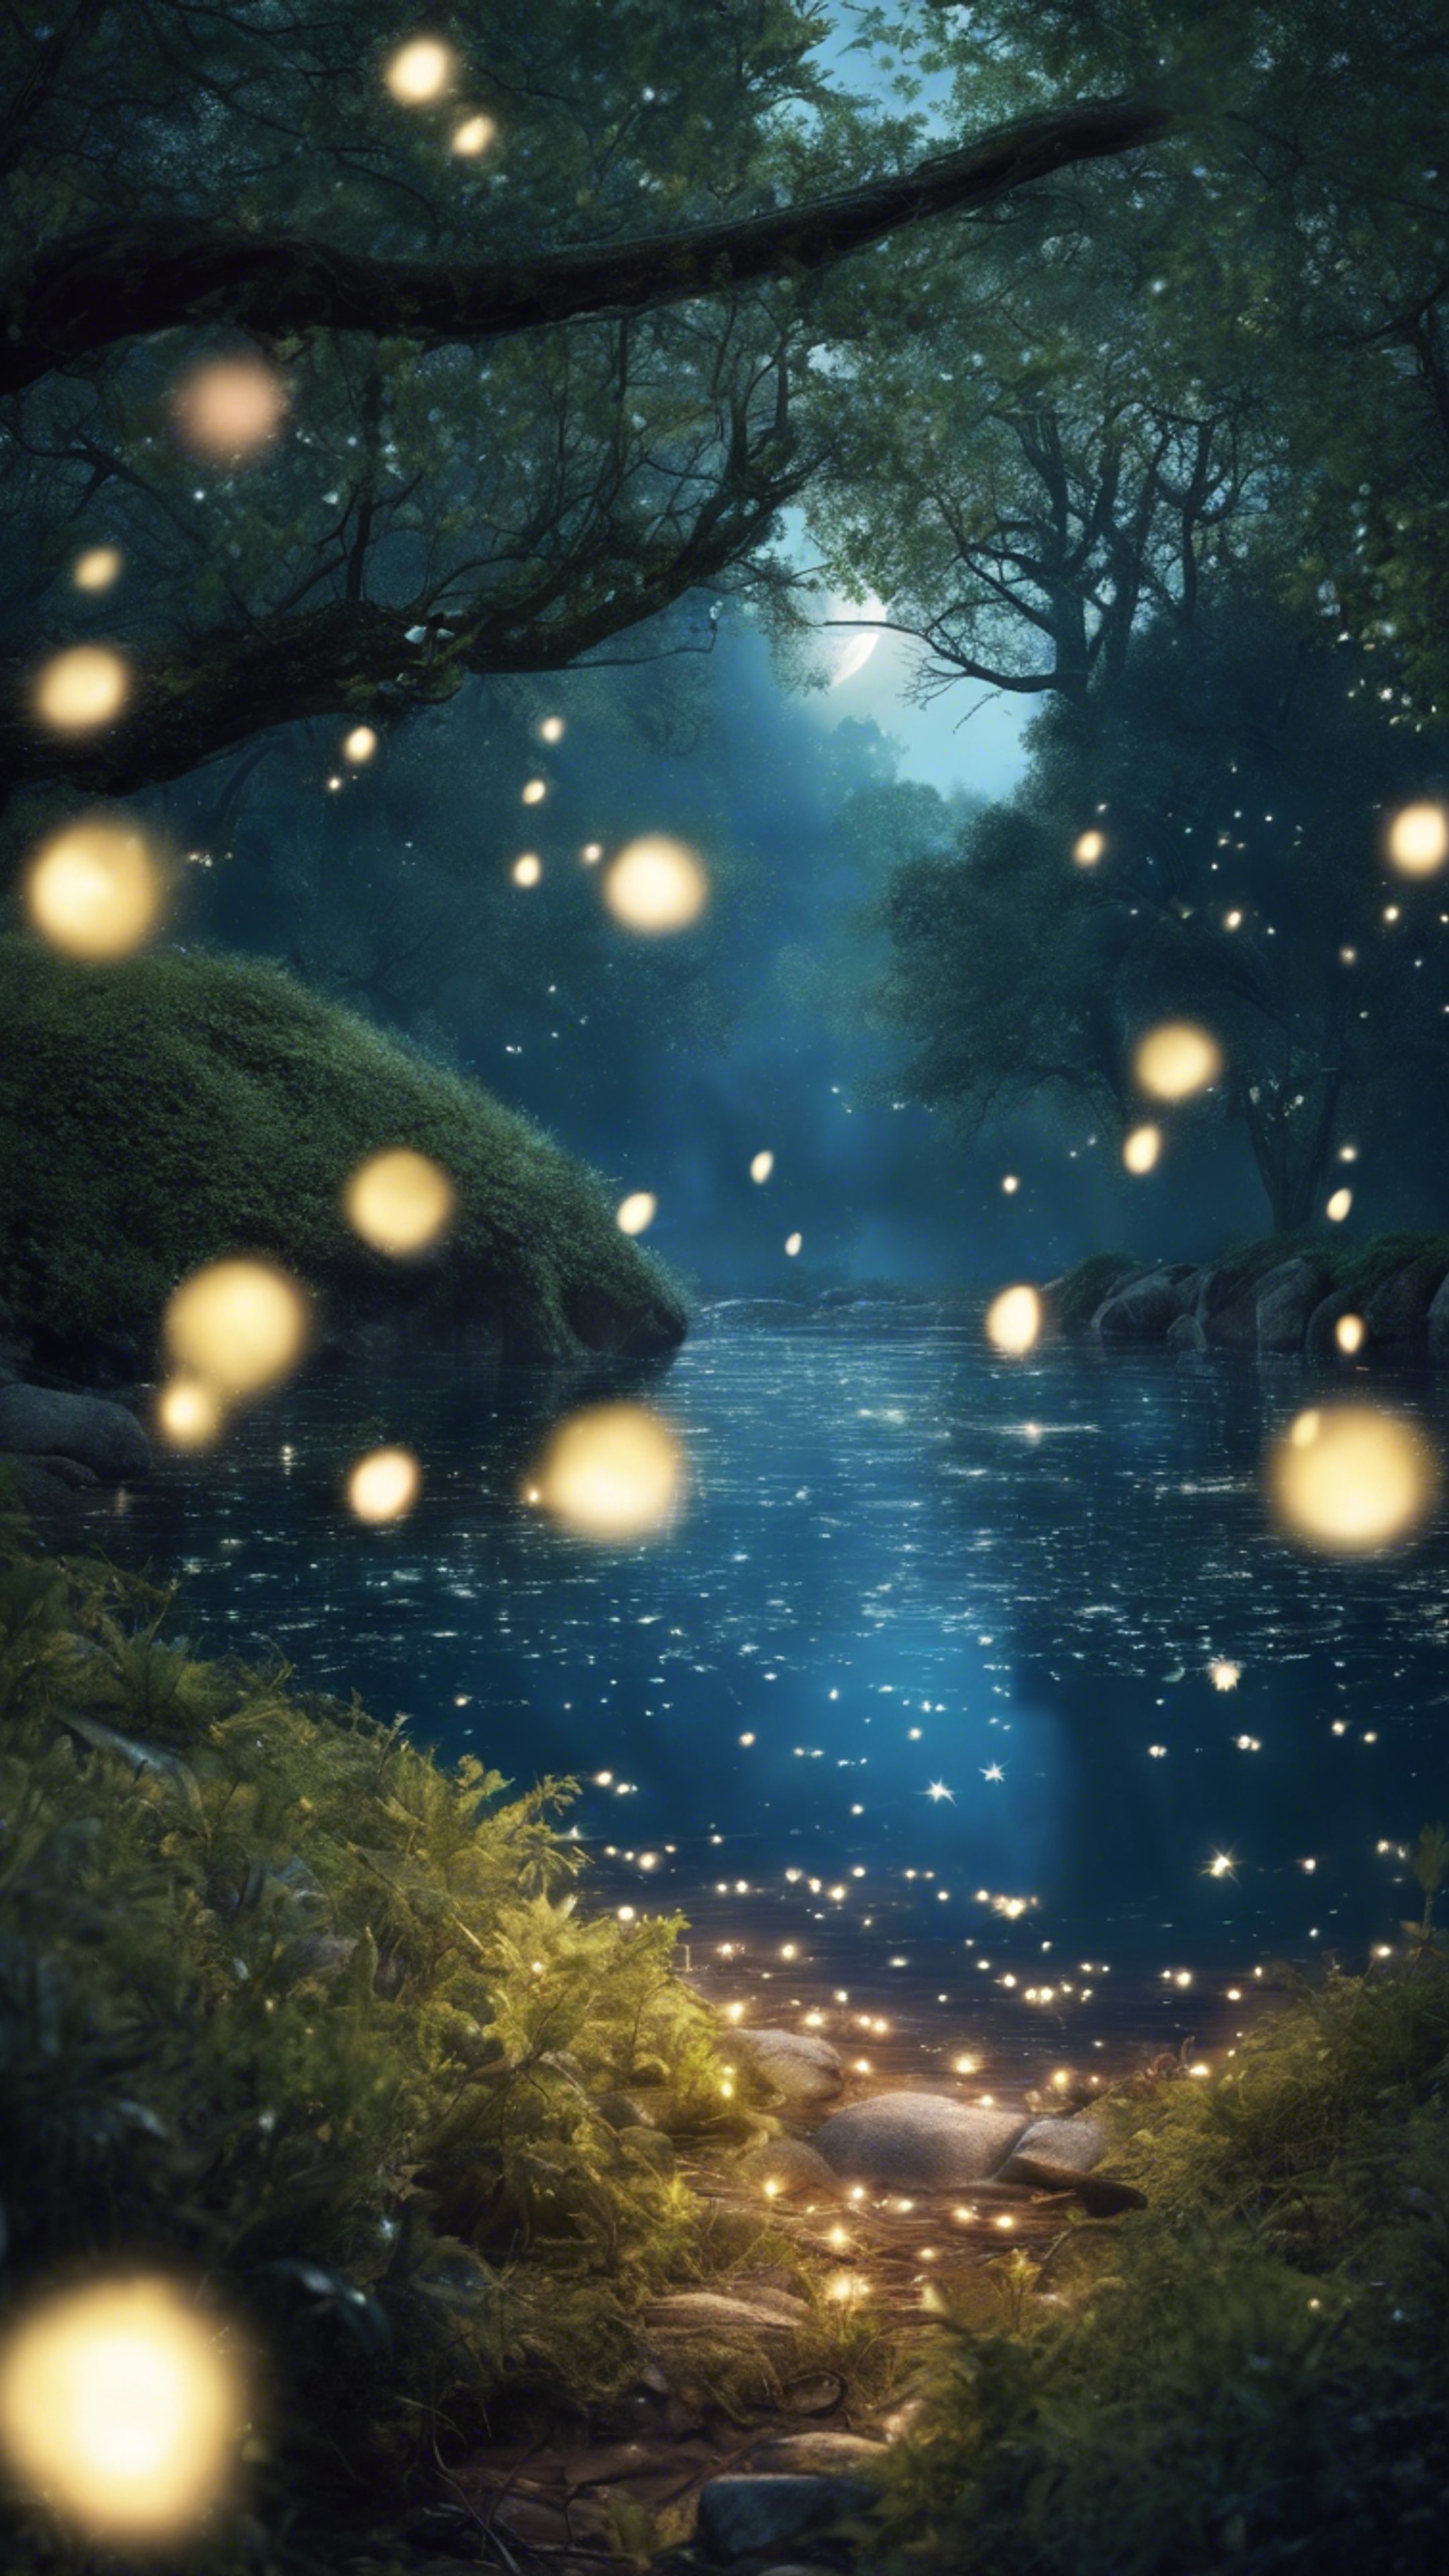 An enchanted forest lit up by midnight blue fireflies, with a river gleaming under the silver moon.壁紙[9c93675377644e8e8e21]